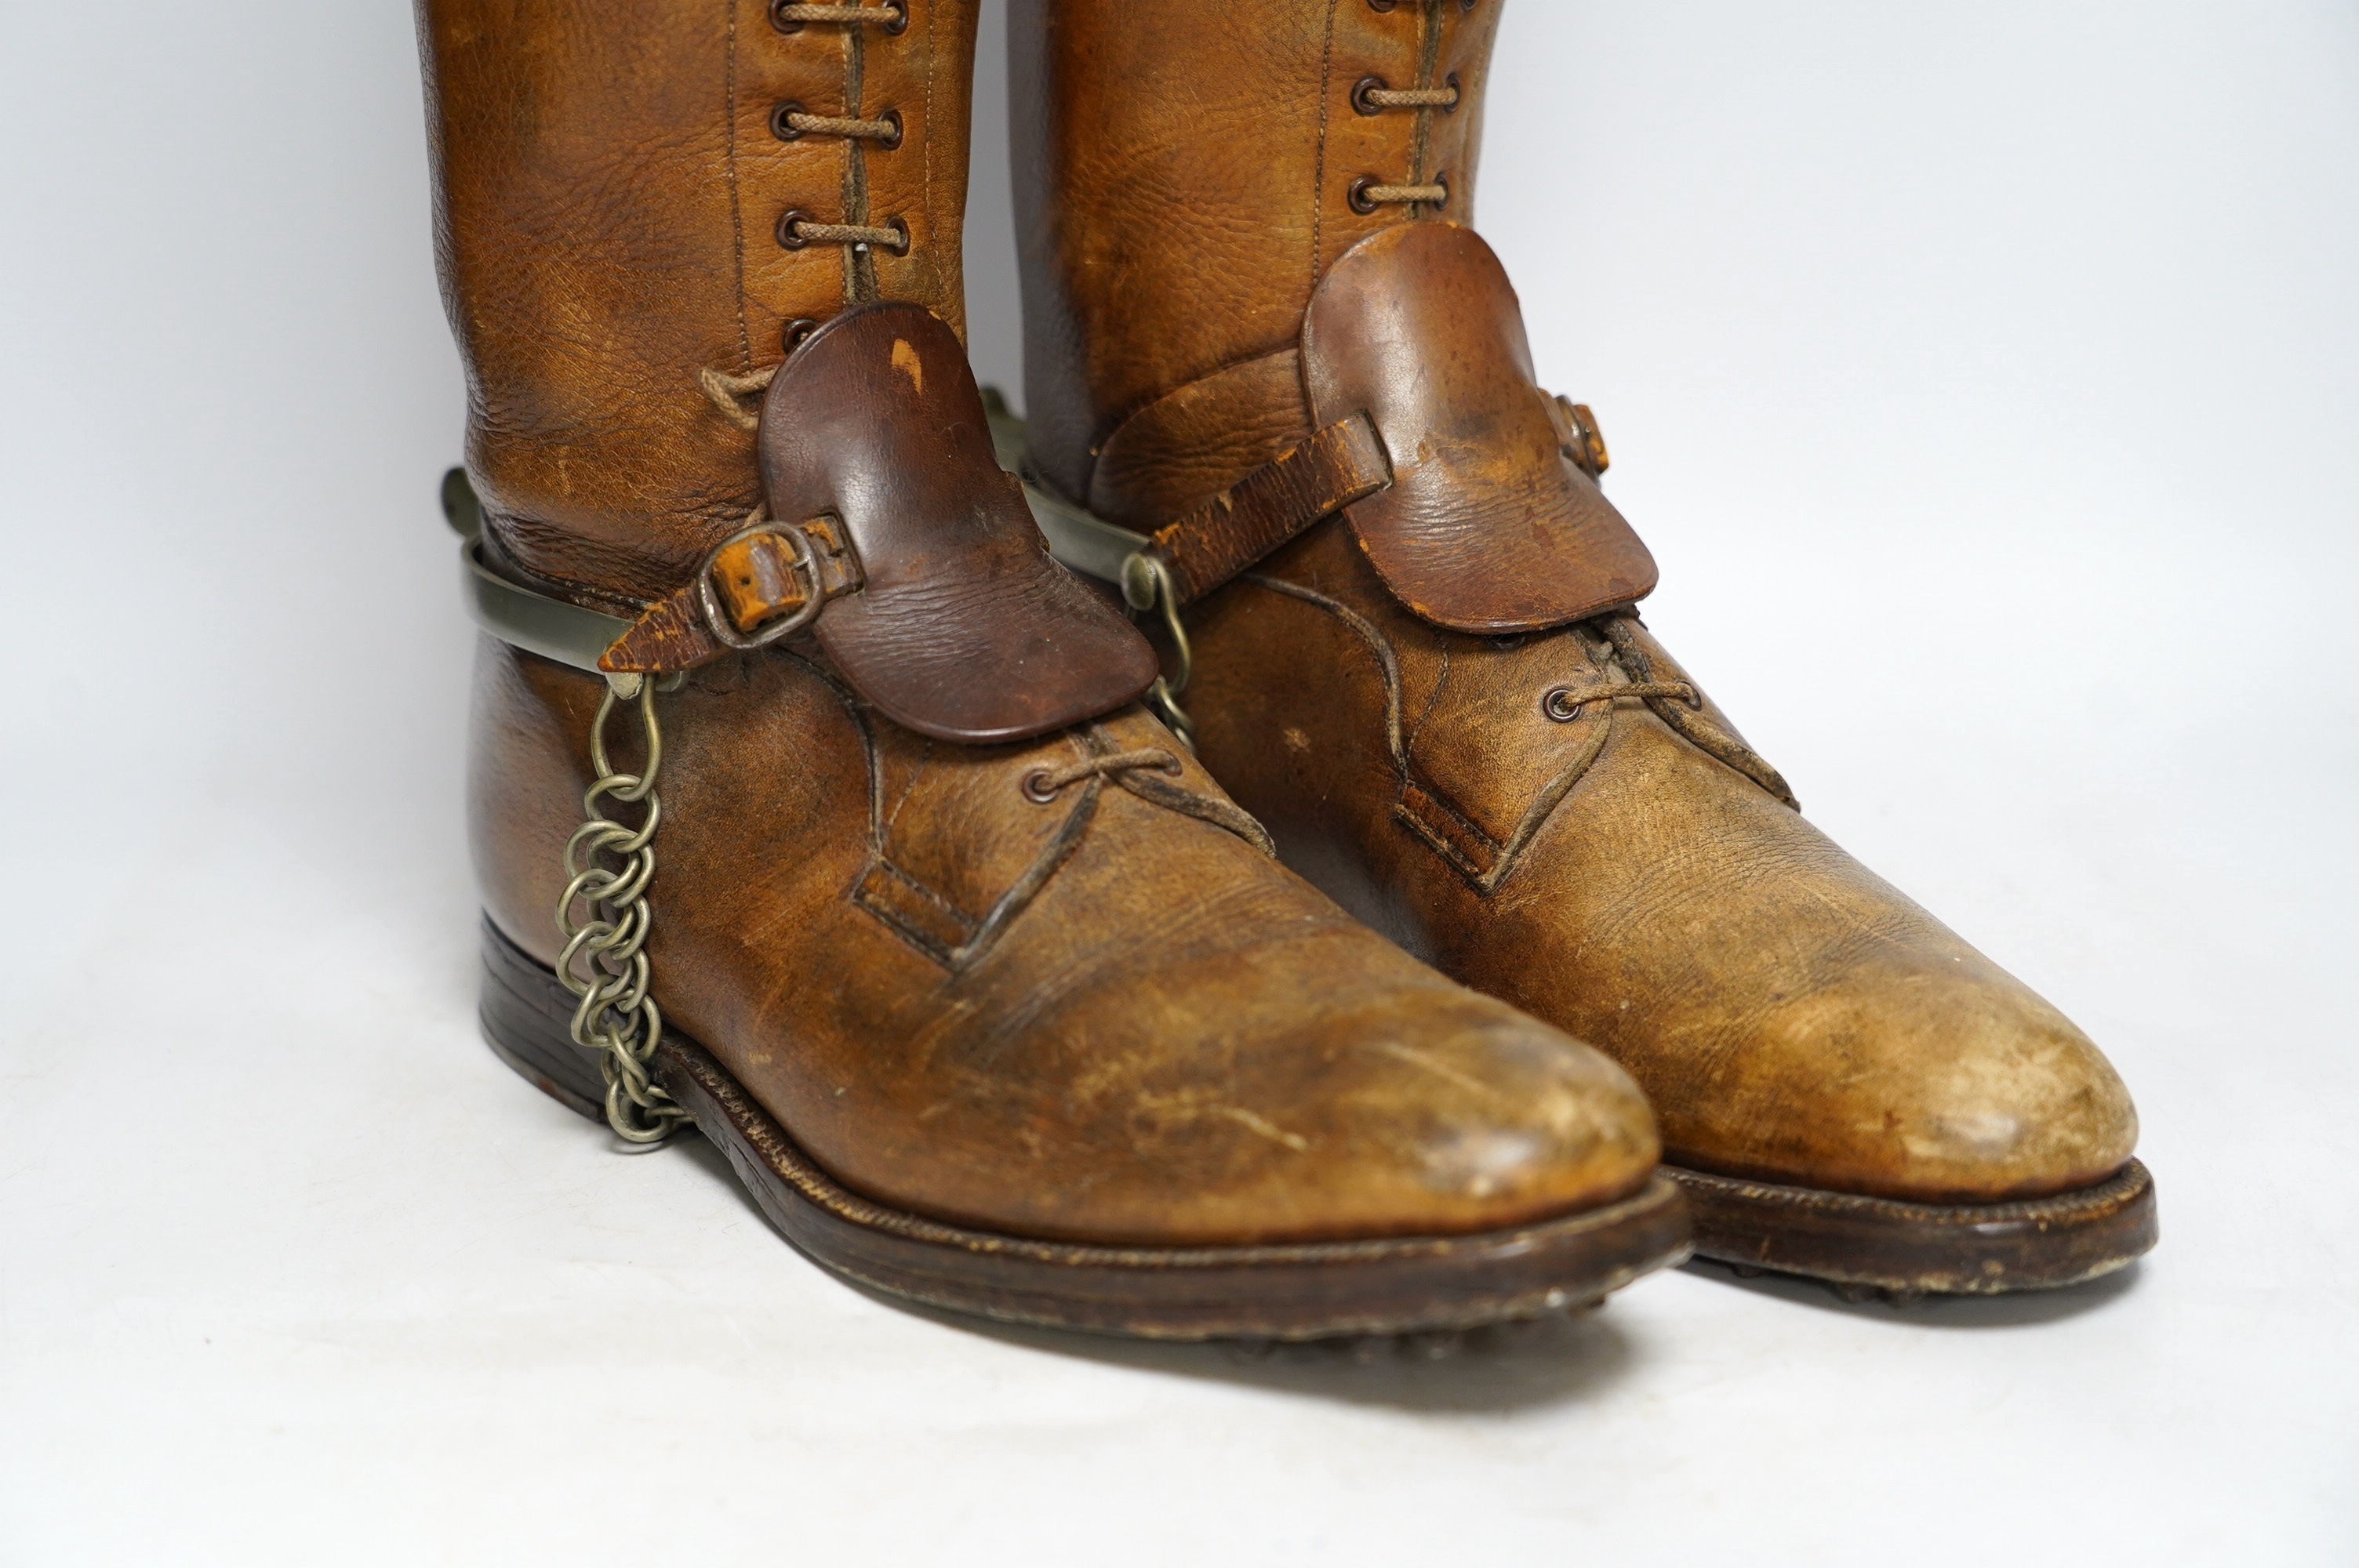 A pair of military First World War boots in tan leather, hobnail soles, two-part wooden shoe trees, and spurs. Condition - fair to good, some rubbing, fading and staining to the leather